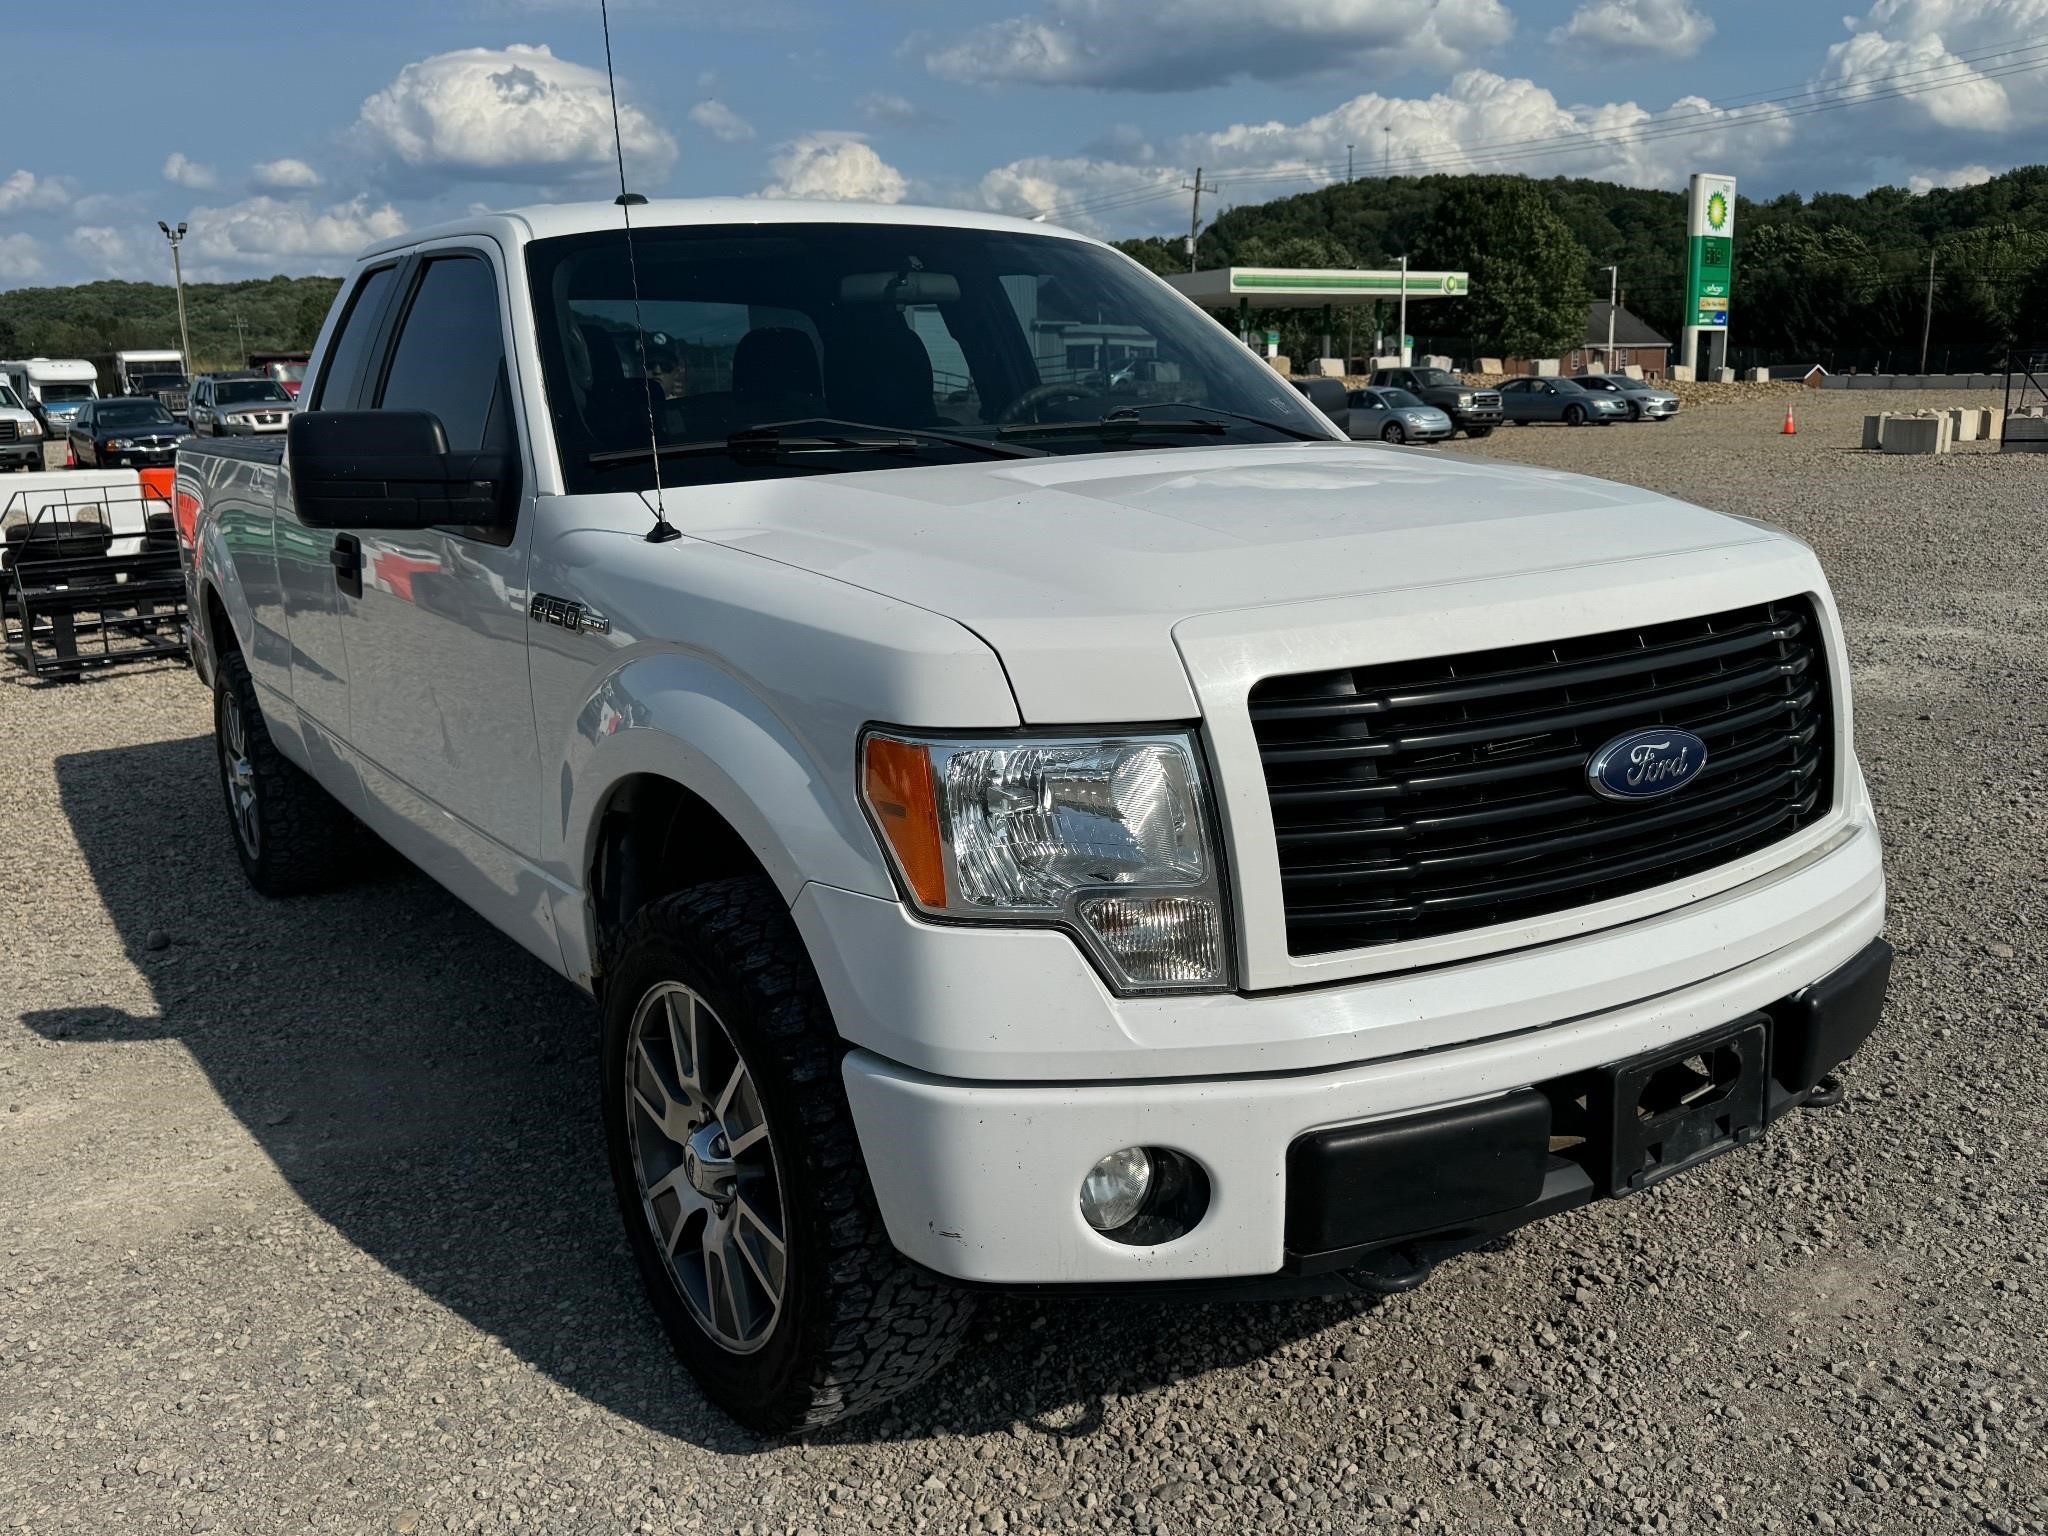 2014 Ford F150 Truck - PA Title